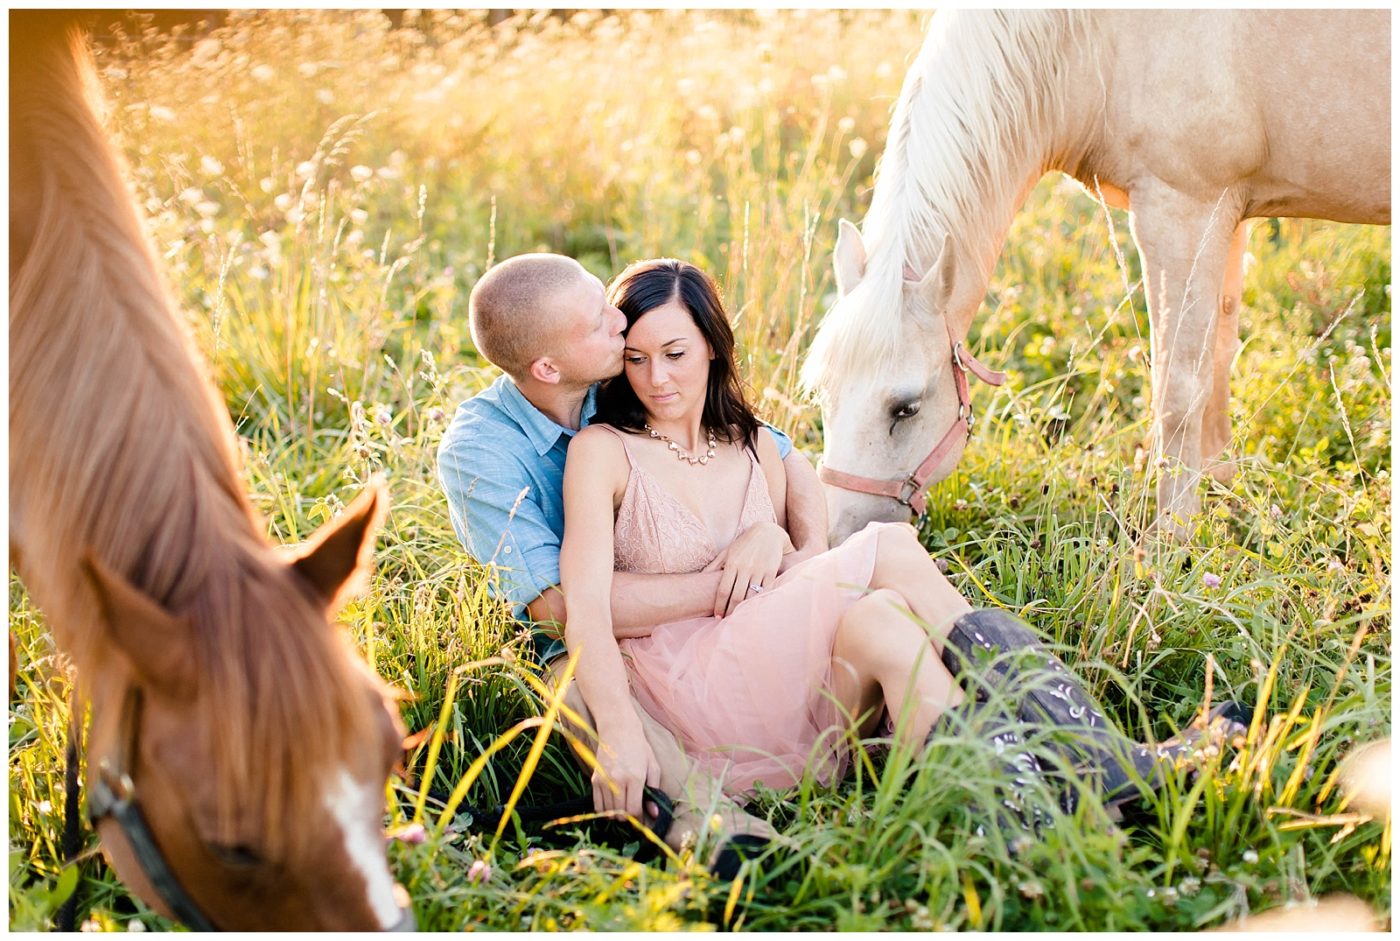 Couple sitting in a field with their horses on grazing beside them for their photos 